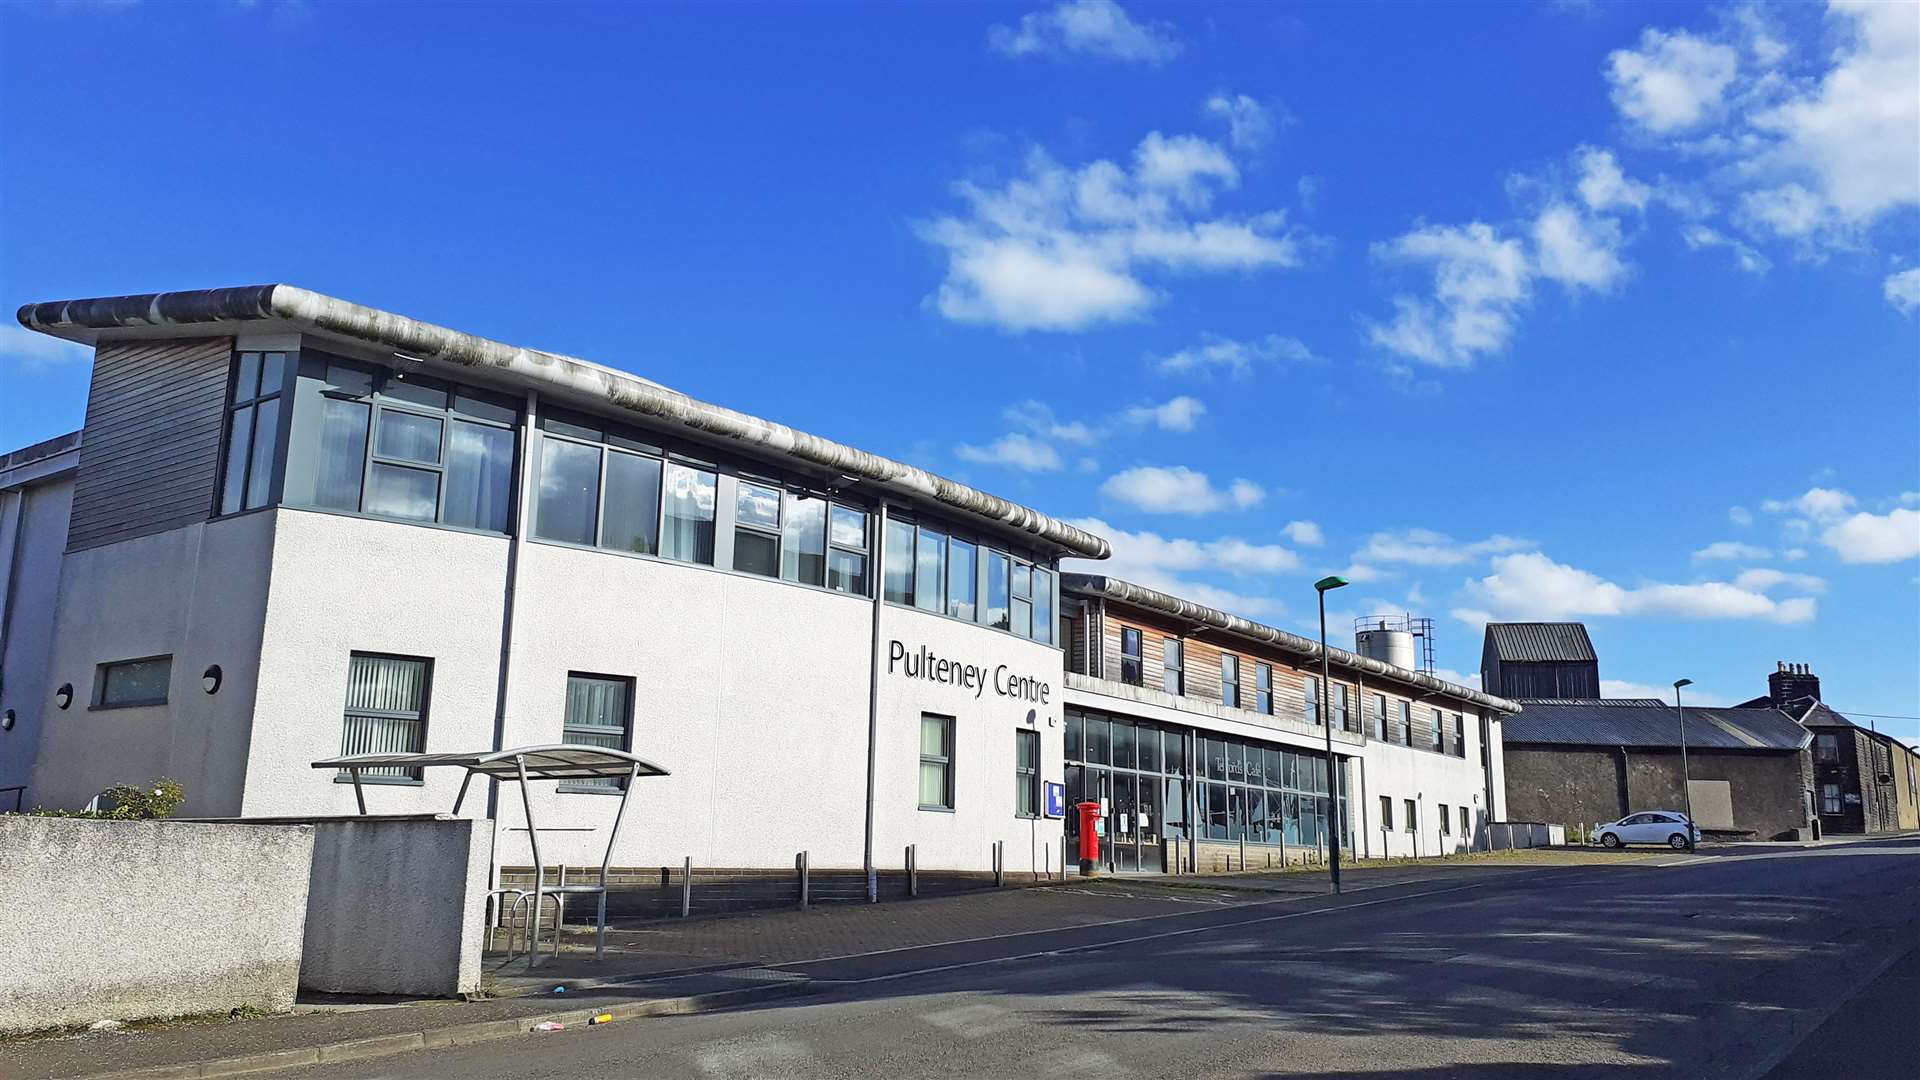 The Pulteney Centre in Huddart Street, Wick – the home of Pulteneytown People's Project.